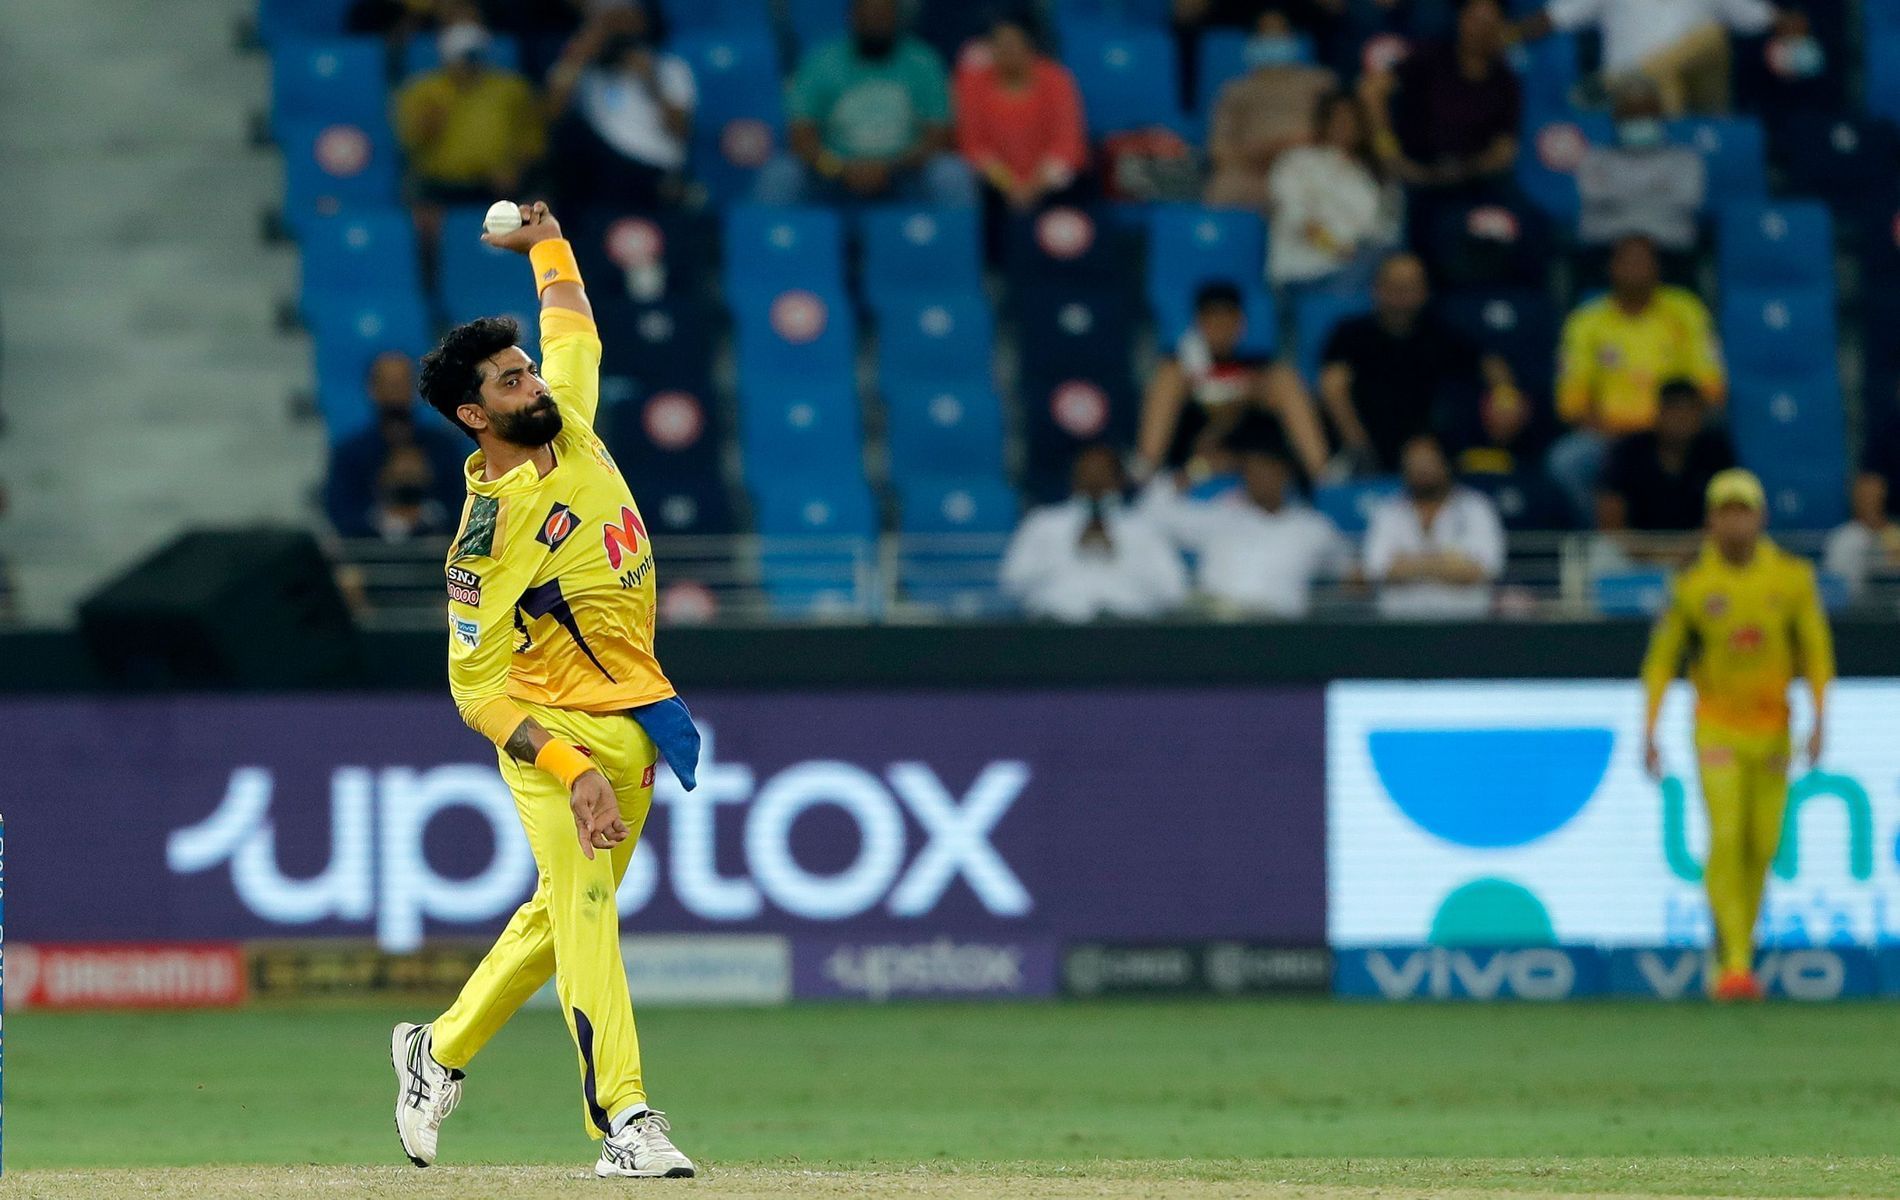 Ravindra Jadeja was in great form with bat and ball in IPL 2021.